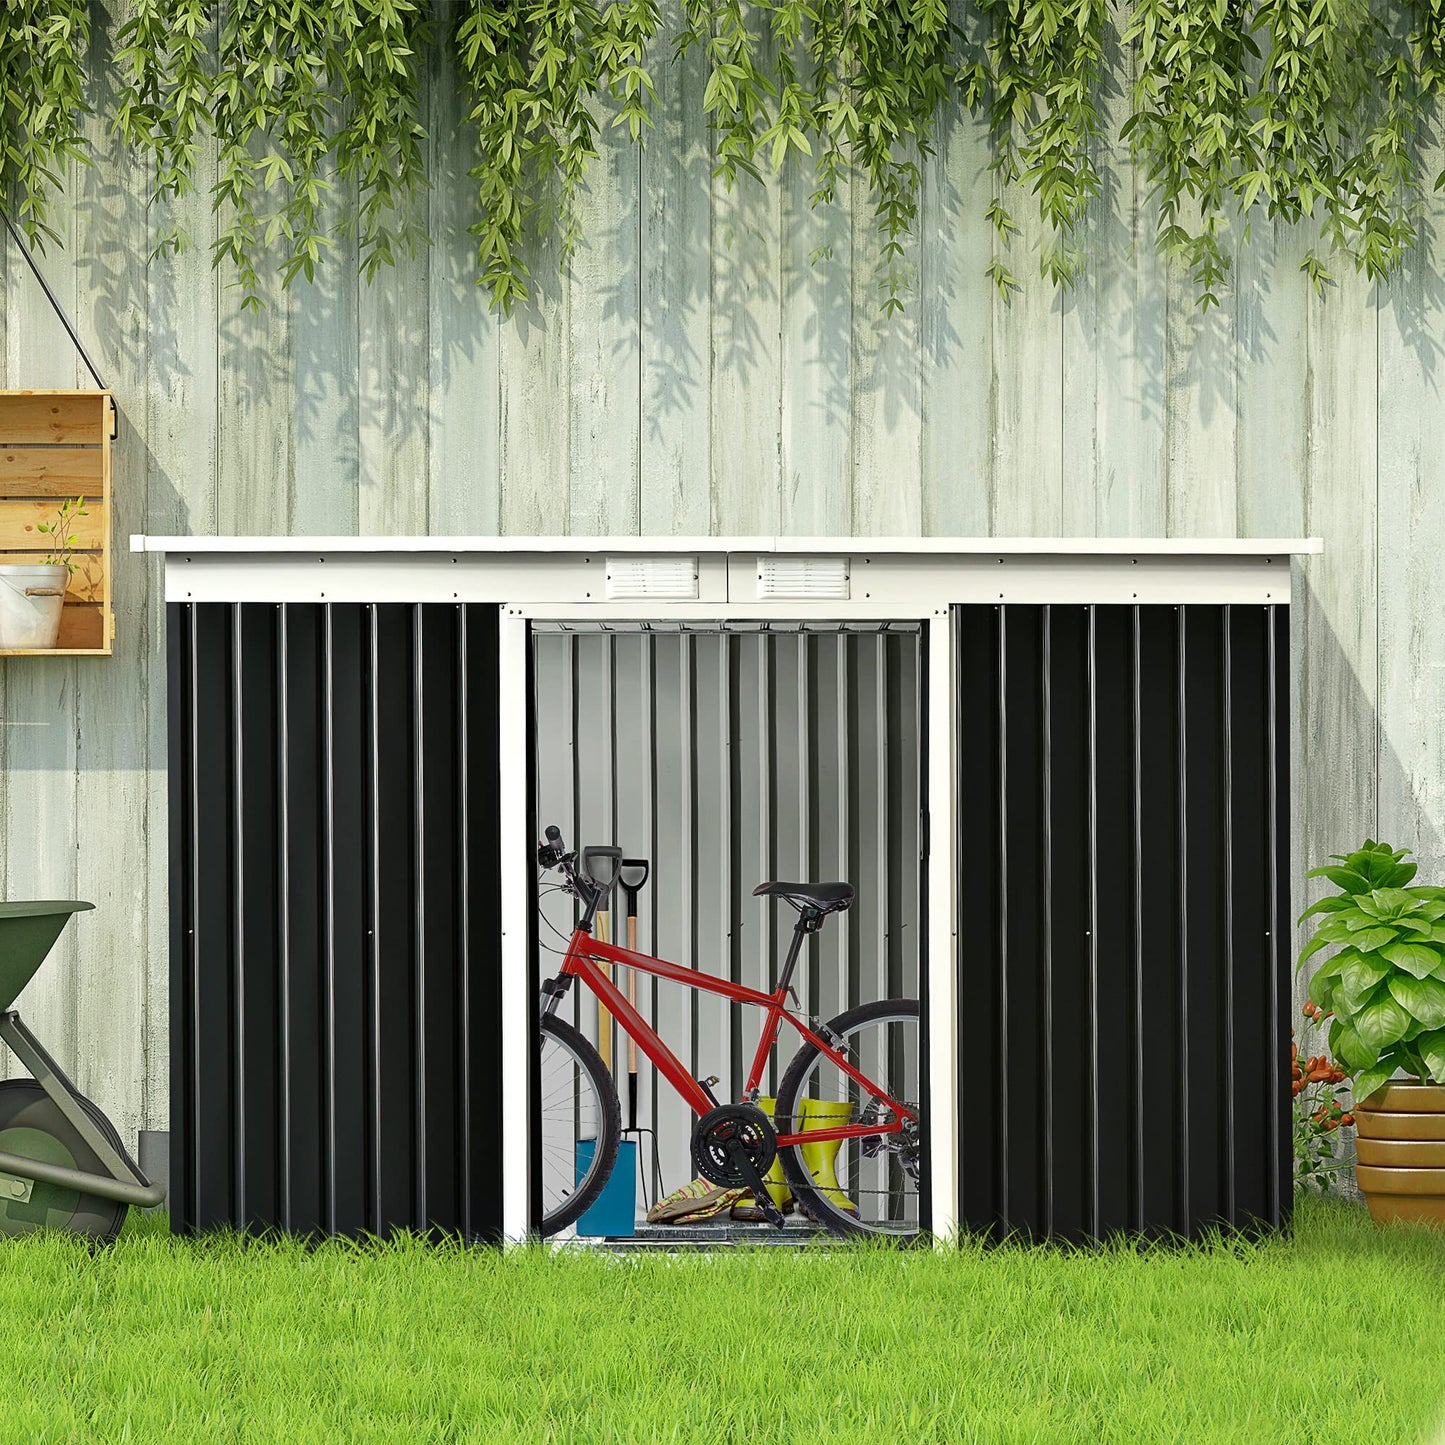 Outsunny 9' x 4' Outdoor Storage Shed, Galvanized Metal Utility Garden Tool House, 2 Vents and Lockable Door for Backyard, Bike, Patio, Garage, Lawn,